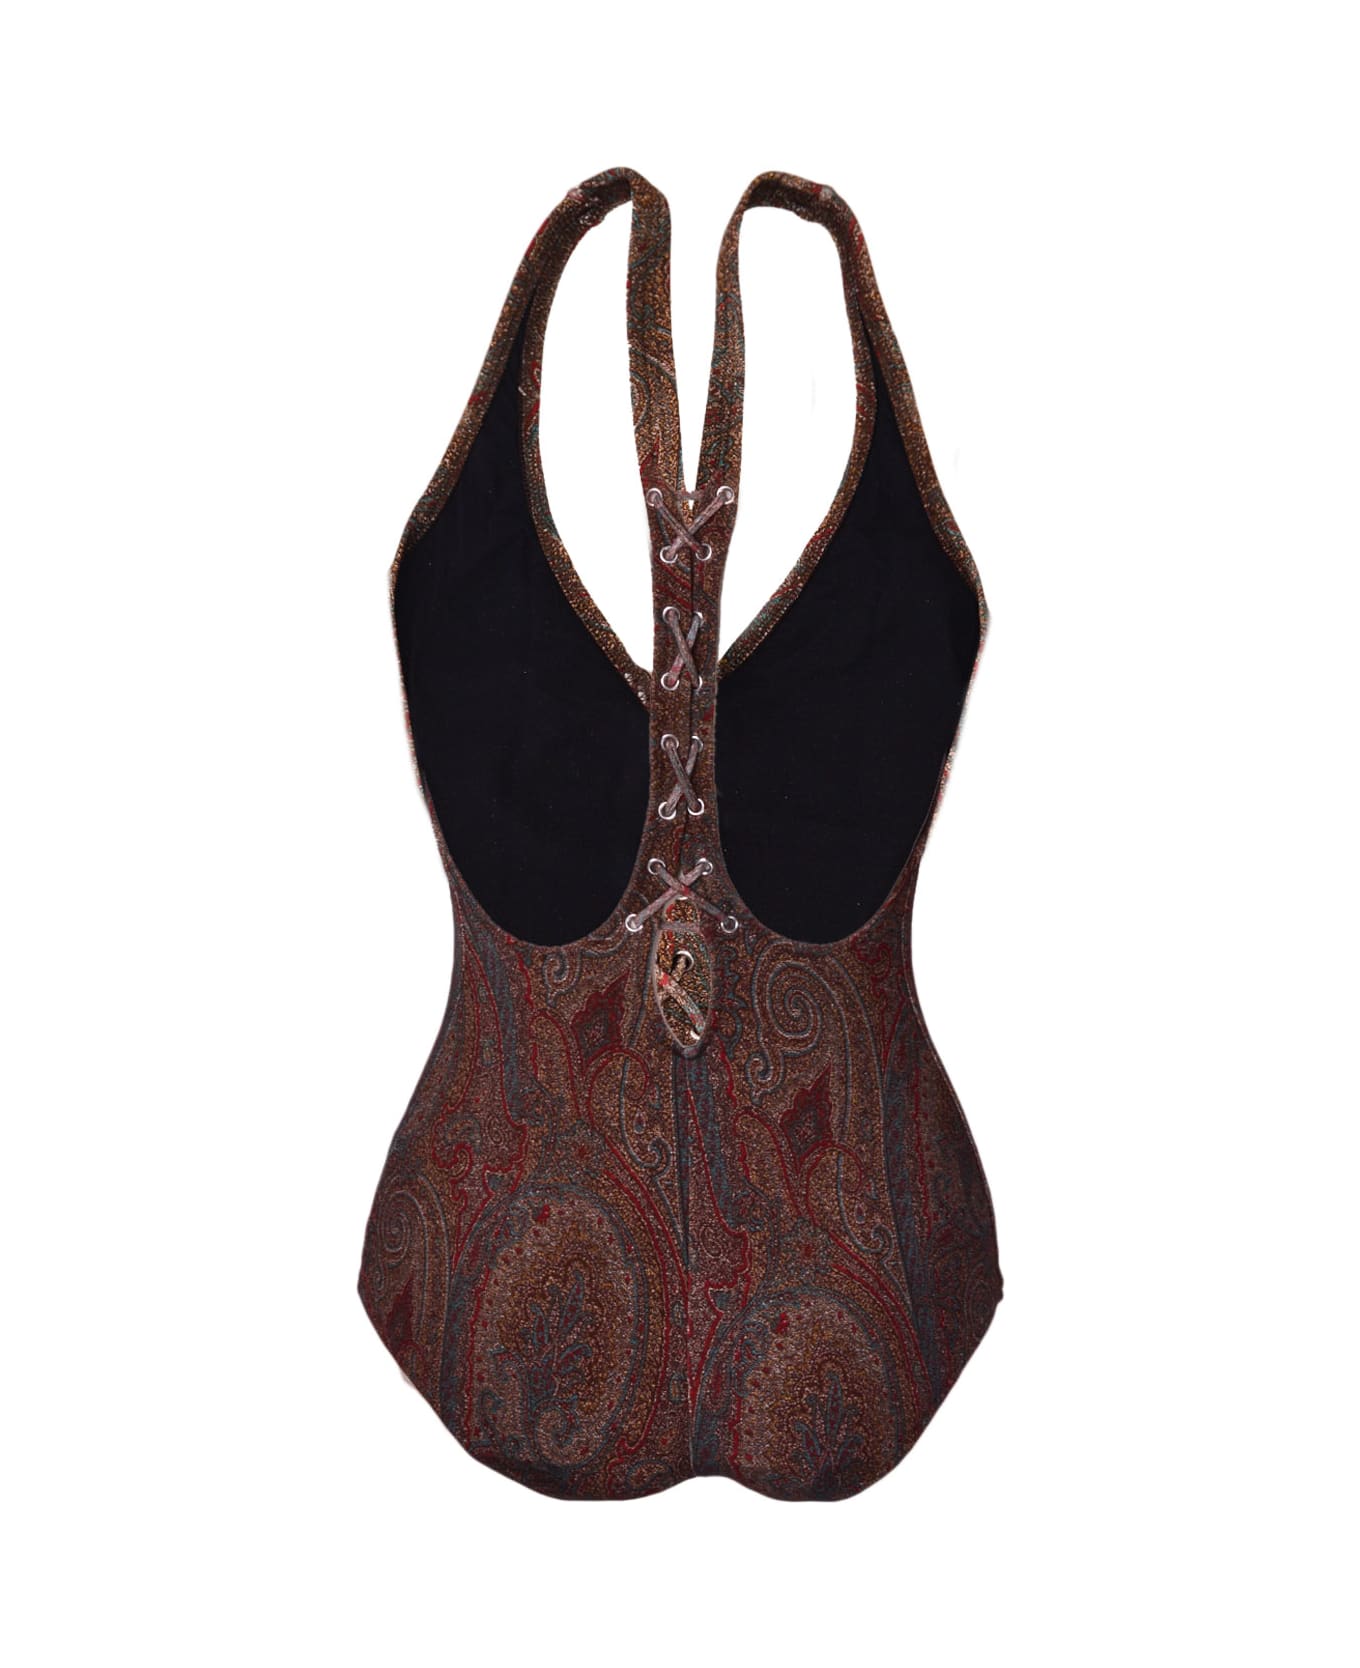 Etro One Piece Swimsuit With Paisley Print - Multicolour